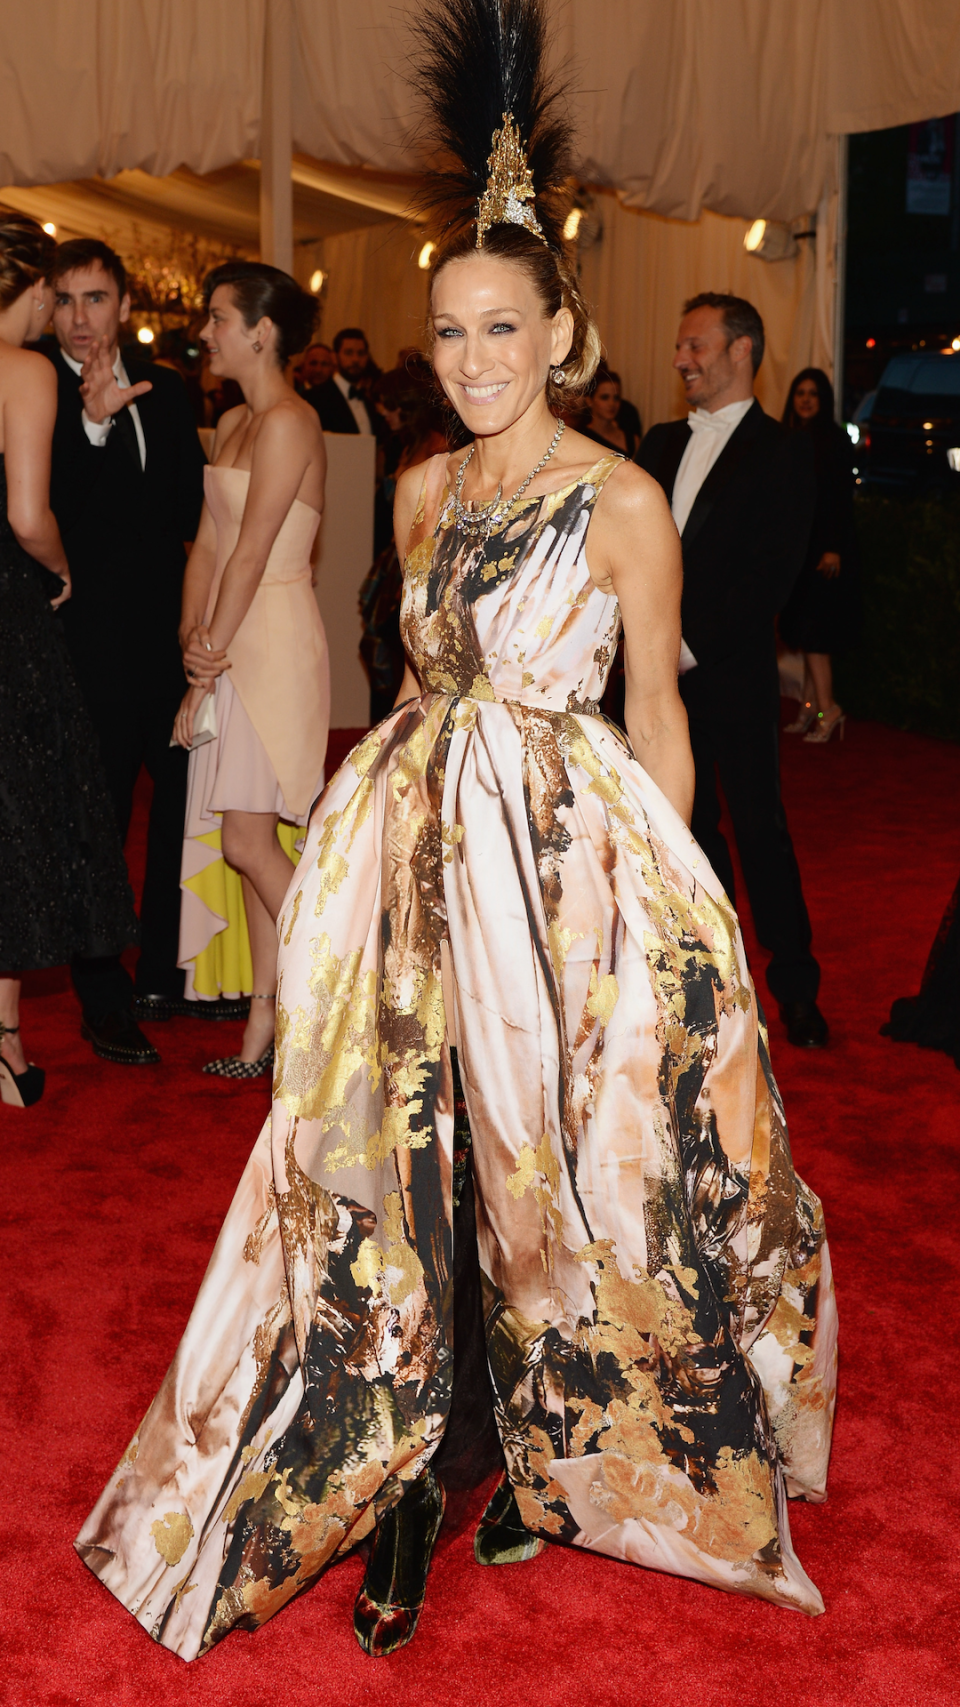 Sarah Jessica Parker attends the Costume Institute Gala for the 